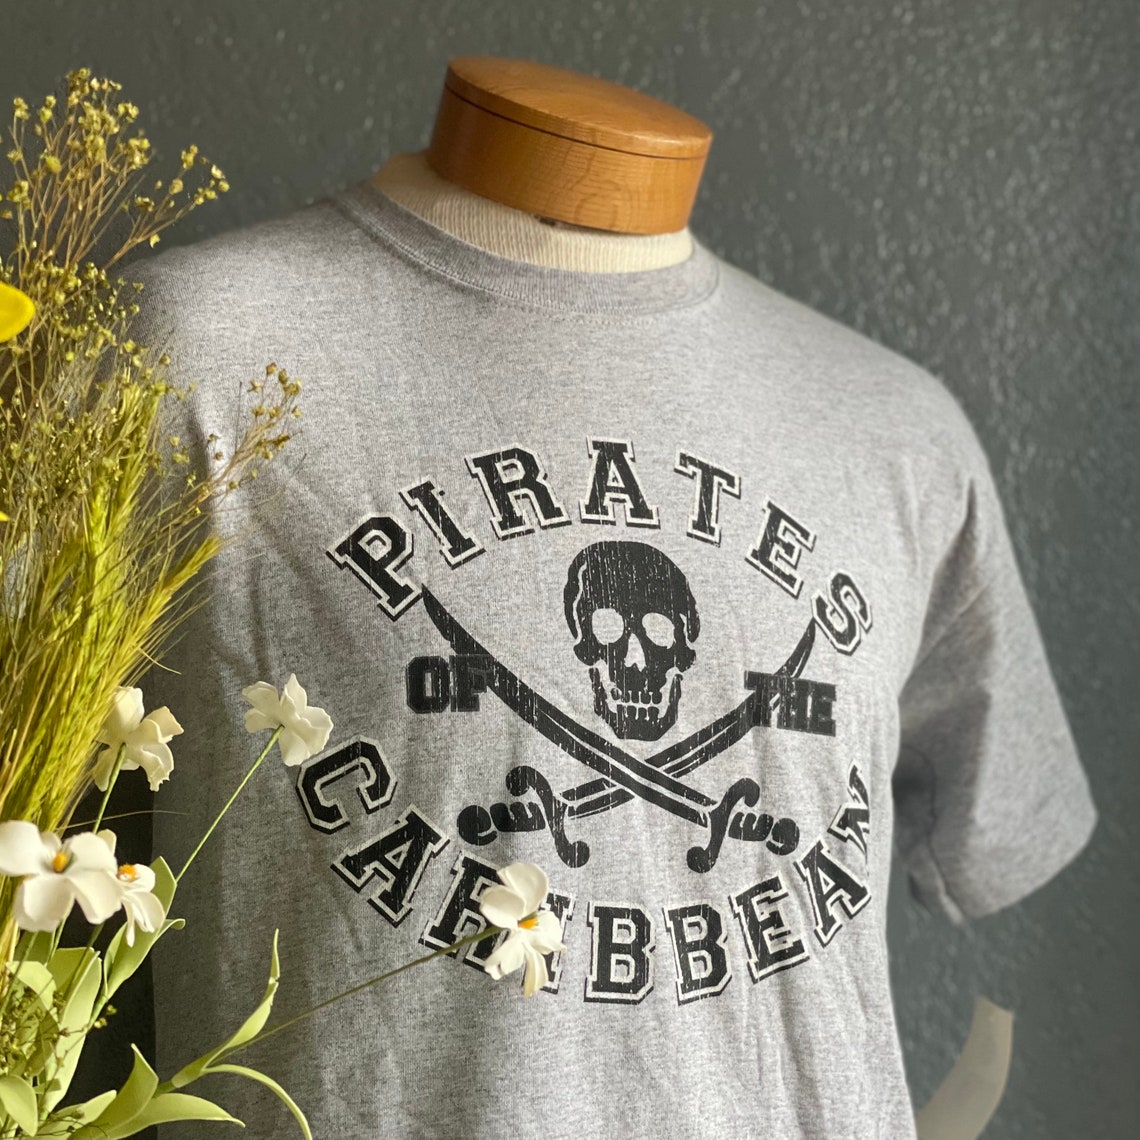 Size Small. Pirates of the Caribbean Brand New Vintage Shirt. - Etsy